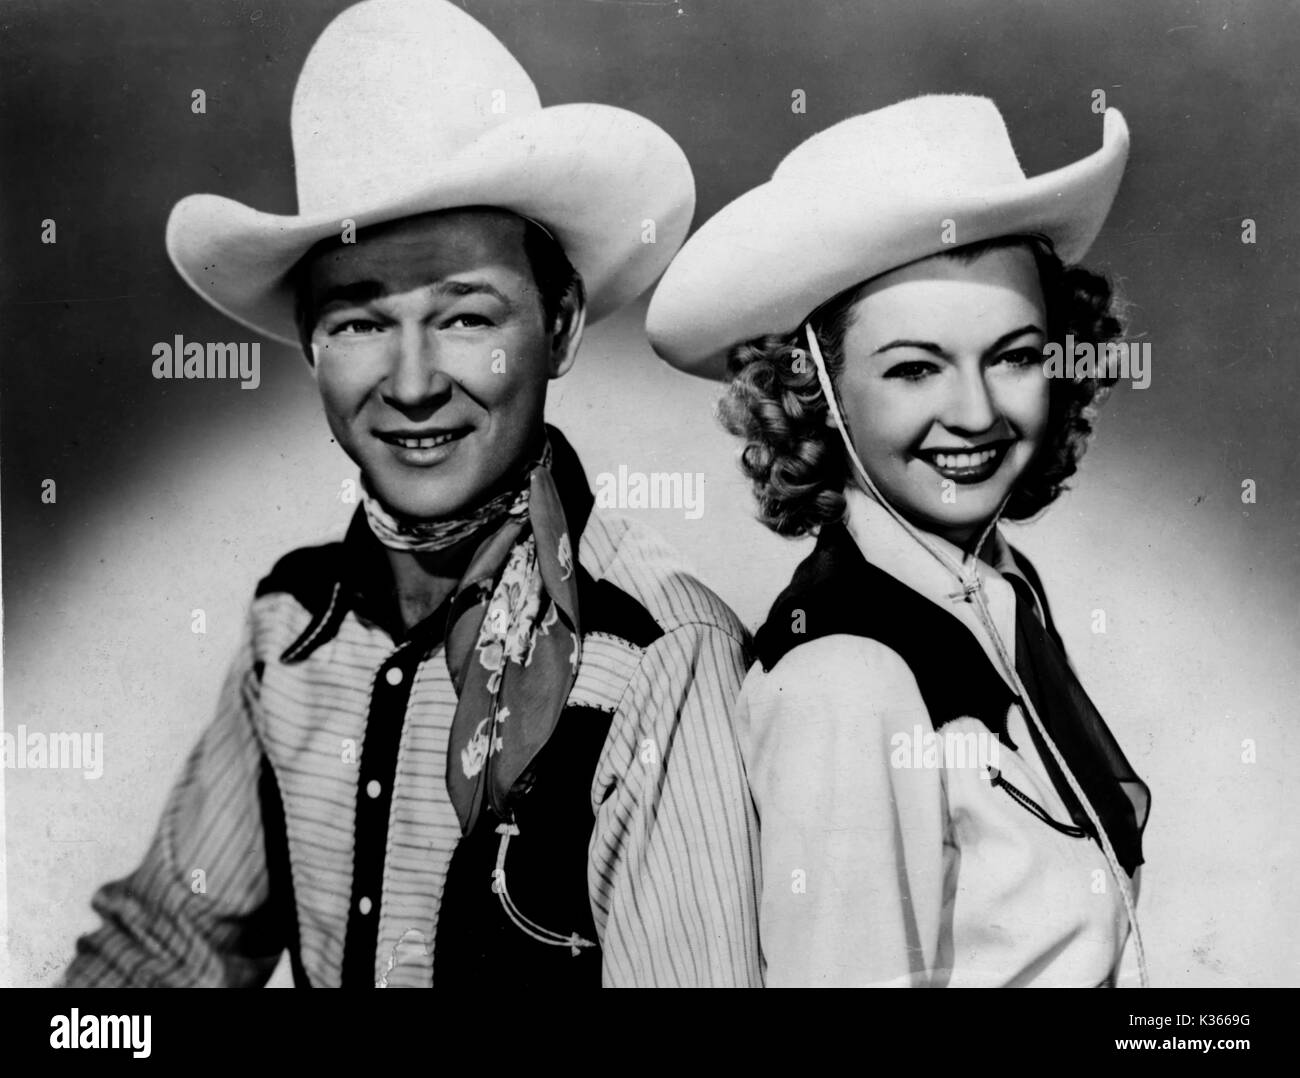 Dale evans Black and White Stock Photos & Images - Alamy